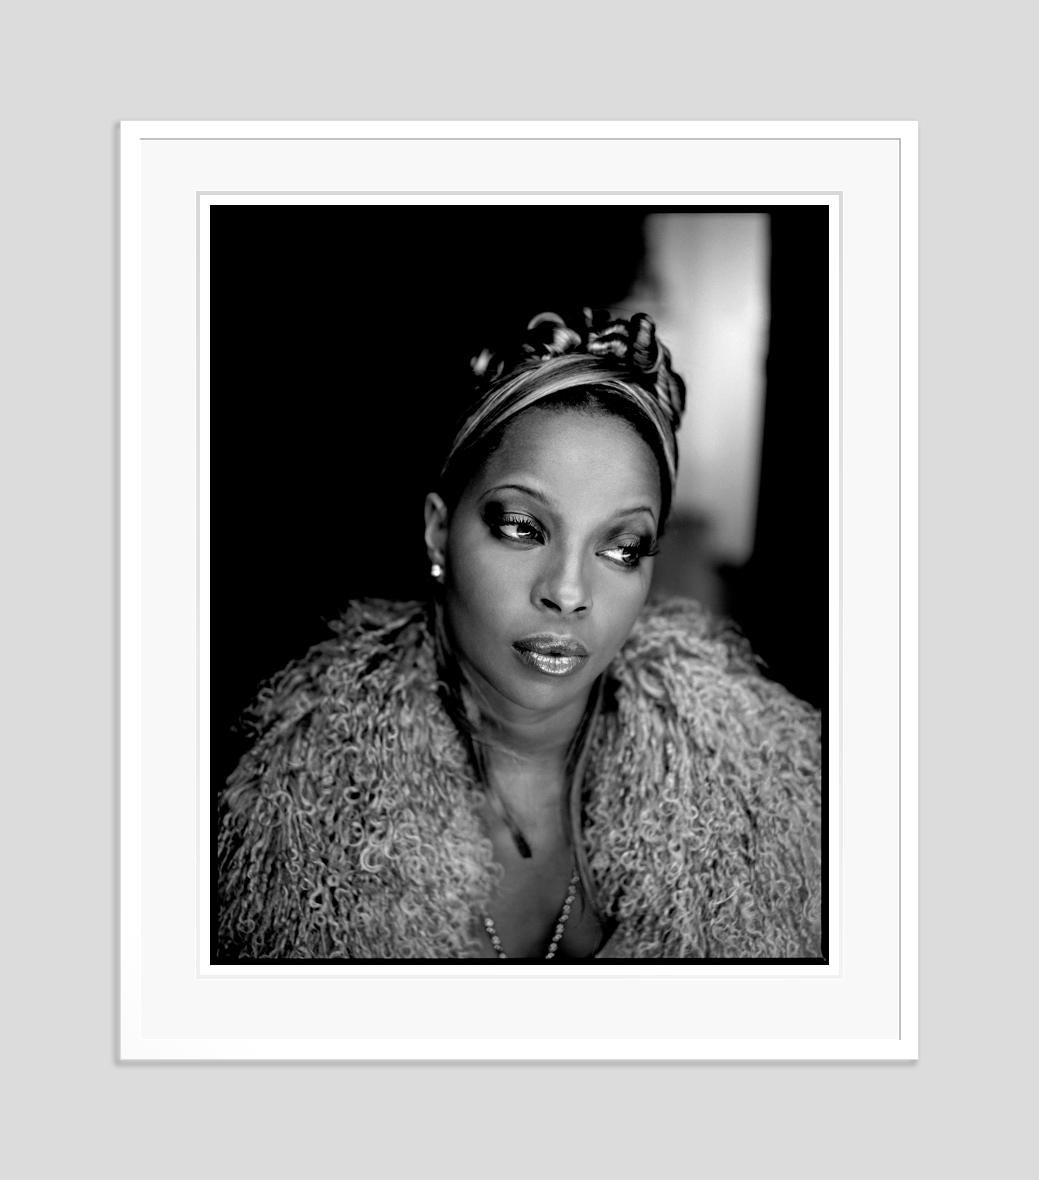 Mary J Blige

2022

by Kevin Westenberg
Signed Limited Edition

Kevin Westenberg is famed for his creation of provocative and electrifying images of world-class musicians, artists and movie stars for over 25 years.

His technique of lighting, colour